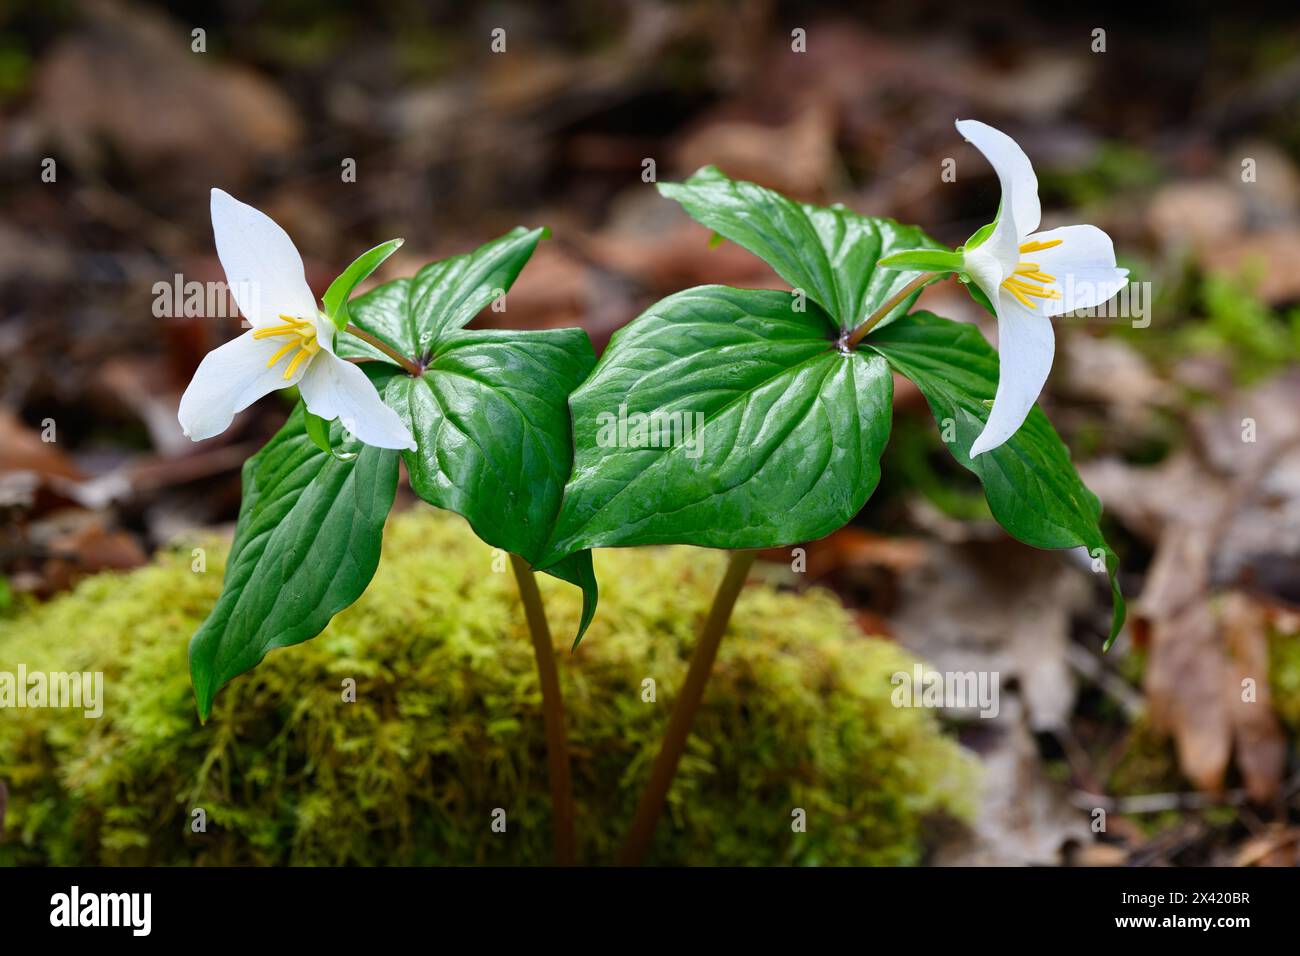 Pair of wiild western white trillium growing on forest floor in wet mossy Spring Stock Photo